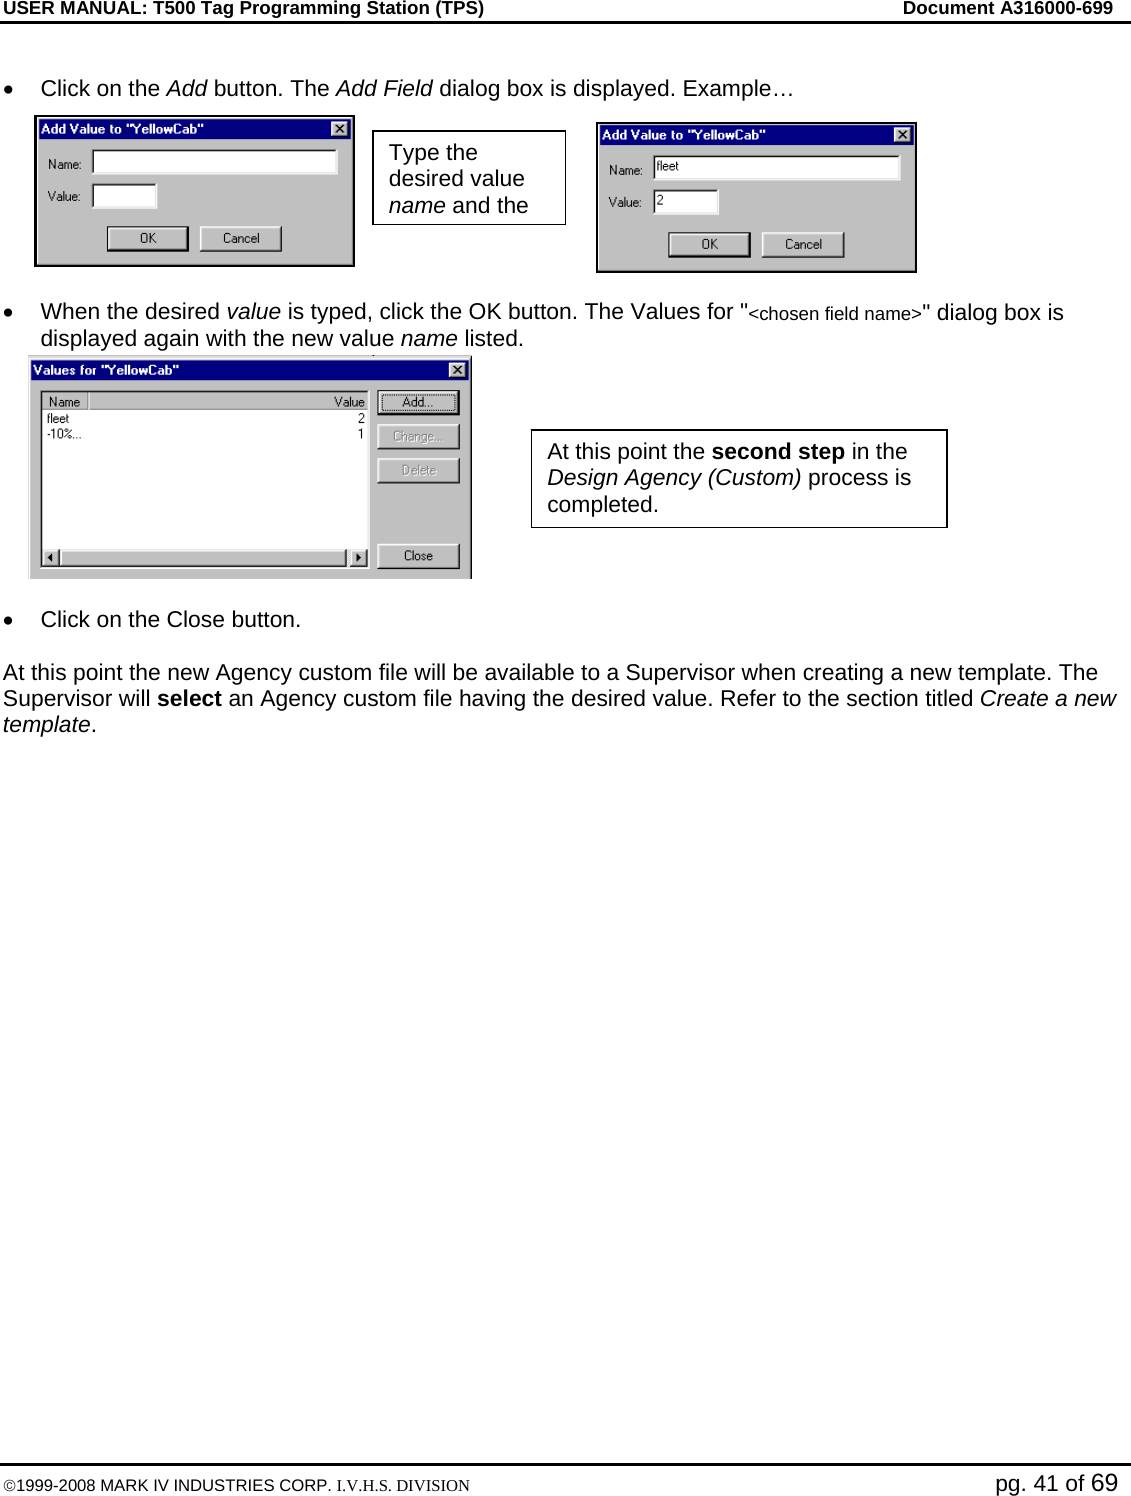 USER MANUAL: T500 Tag Programming Station (TPS)     Document A316000-699  ©1999-2008 MARK IV INDUSTRIES CORP. I.V.H.S. DIVISION   pg. 41 of 69  •  Click on the Add button. The Add Field dialog box is displayed. Example…  •  When the desired value is typed, click the OK button. The Values for &quot;&lt;chosen field name&gt;&quot; dialog box is displayed again with the new value name listed.  •  Click on the Close button.  At this point the new Agency custom file will be available to a Supervisor when creating a new template. The Supervisor will select an Agency custom file having the desired value. Refer to the section titled Create a new template.  Type the desired value name and the At this point the second step in the Design Agency (Custom) process is completed.  